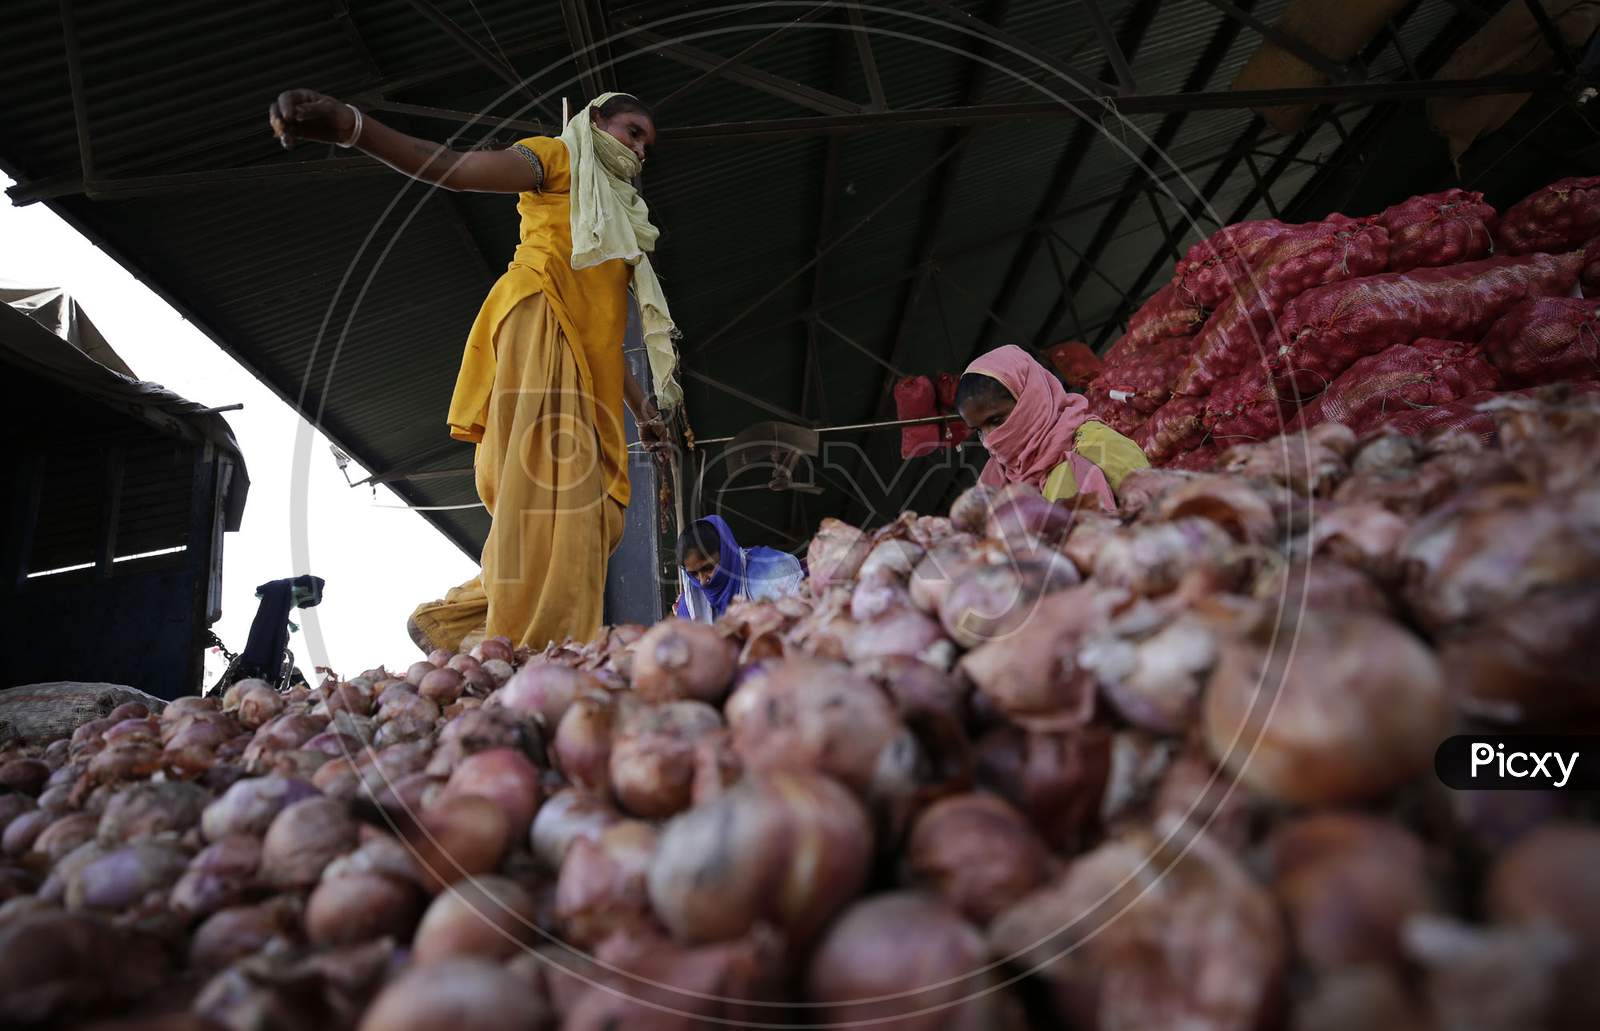 Workers sort onion at Narwal vegetable wholesale market on the outskirts of Jammu on September,17 2020.